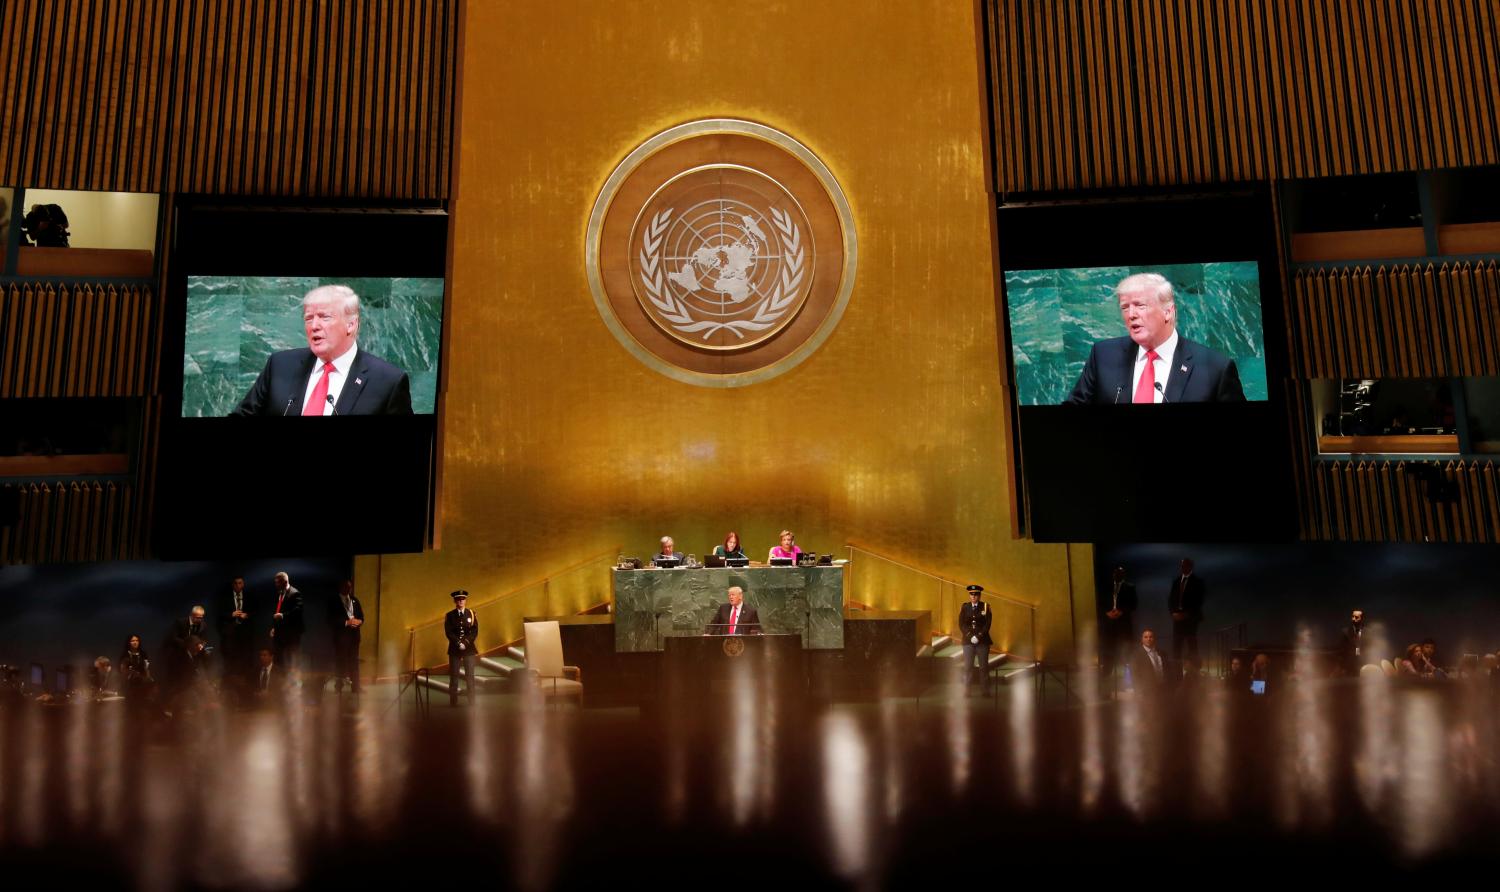 U.S. President Donald Trump addresses the 73rd session of the United Nations General Assembly at U.N. headquarters in New York, U.S., September 25, 2018. REUTERS/Carlos Barria - RC1C6B2D13E0